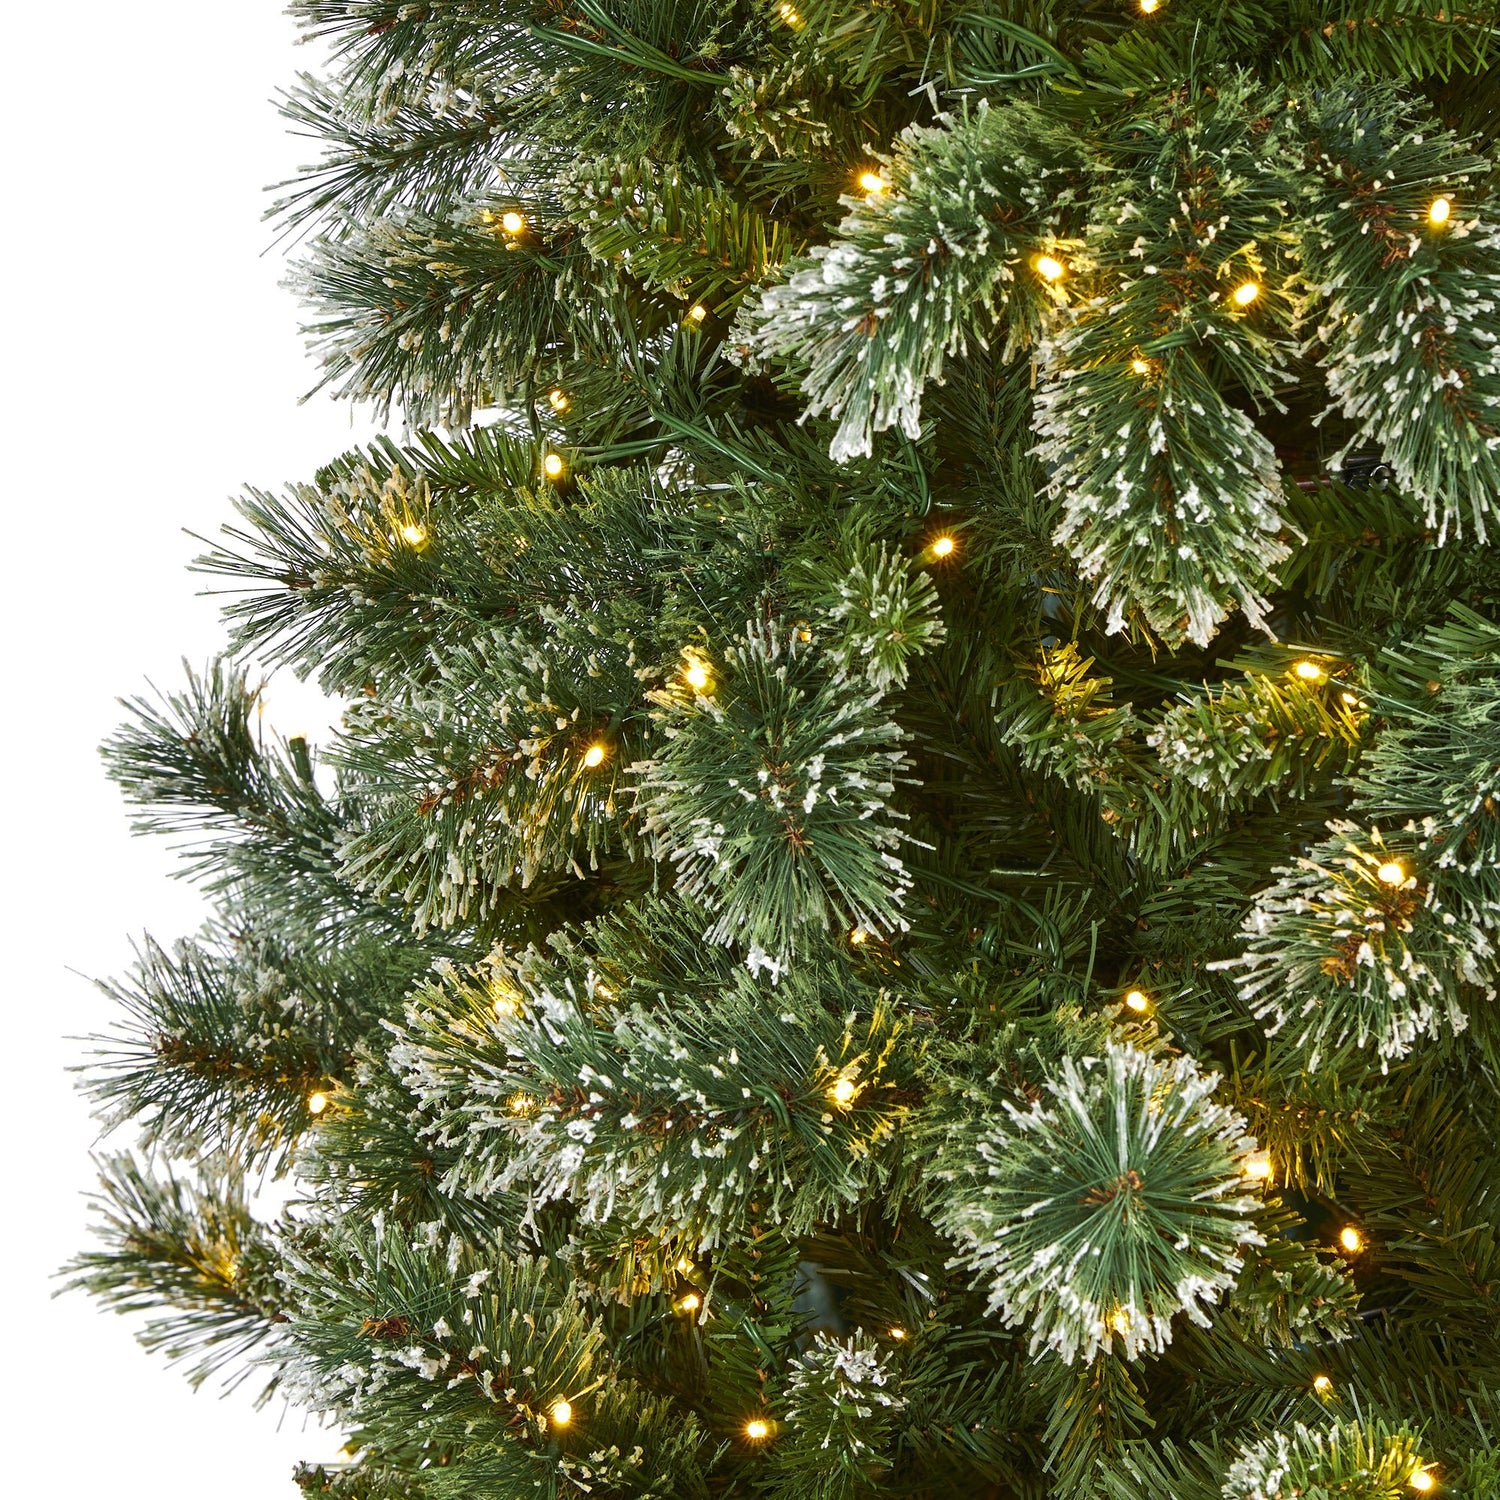 Nearly Natural 9ft. Frosted Swiss Pine Artificial Christmas Tree with 700 Clear LED Lights and Berries